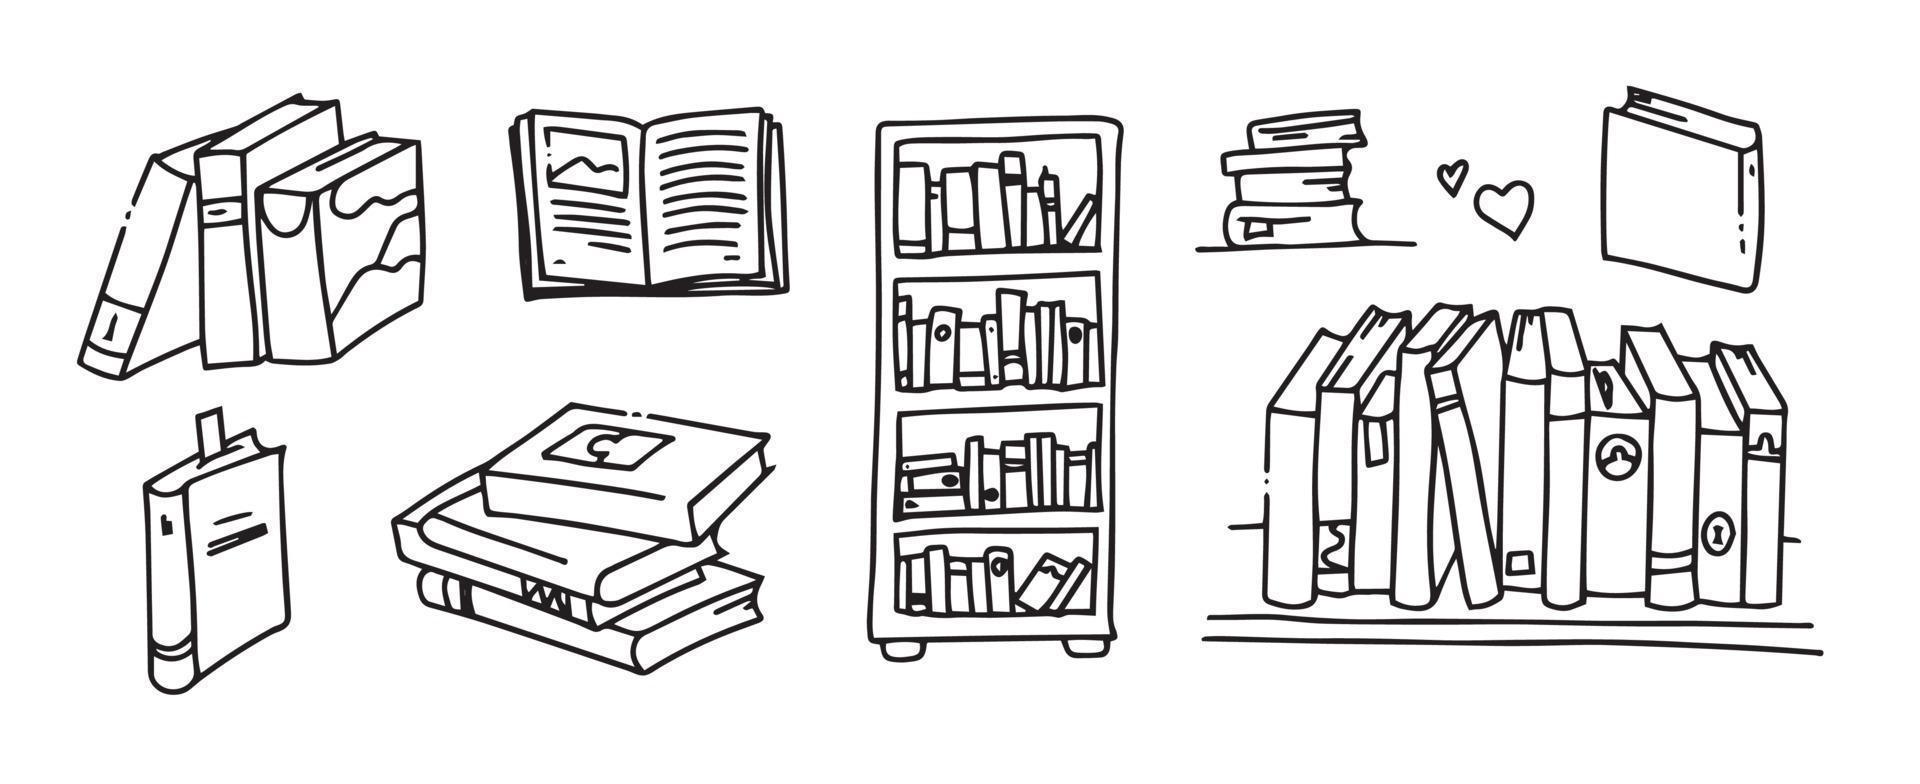 Doodle book collection - vector illustration. Books on the shelf. Pile of books.